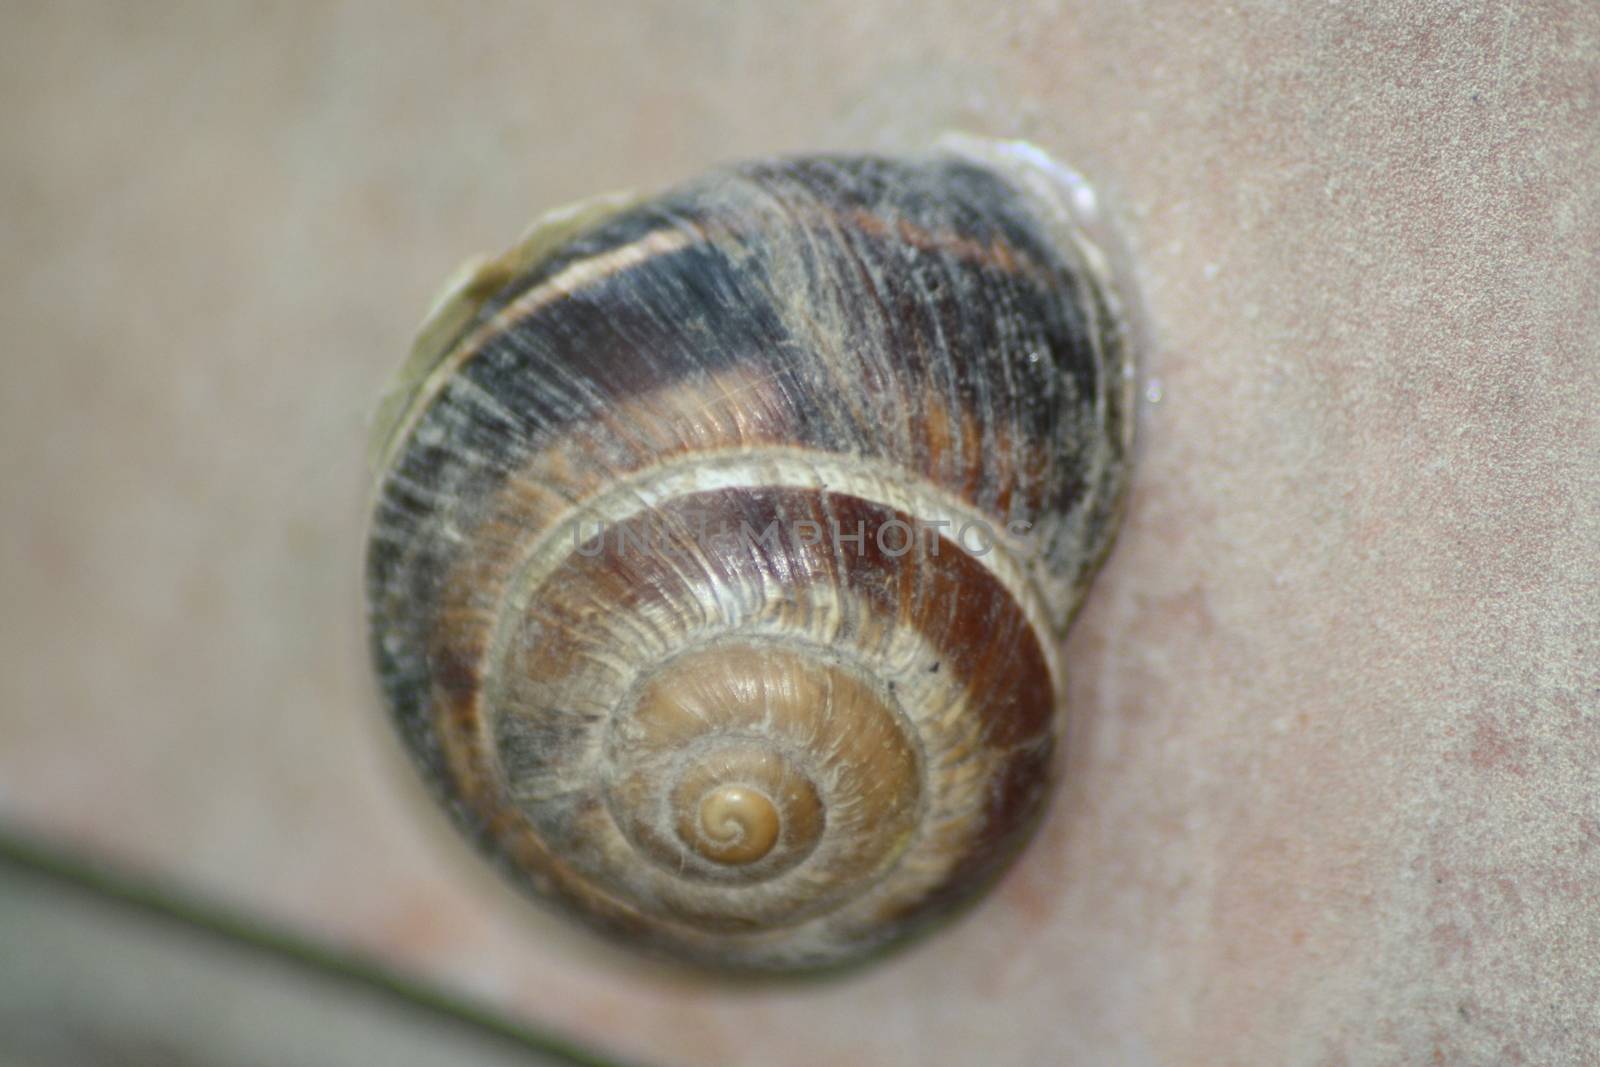 A close up of a snail. High quality photo